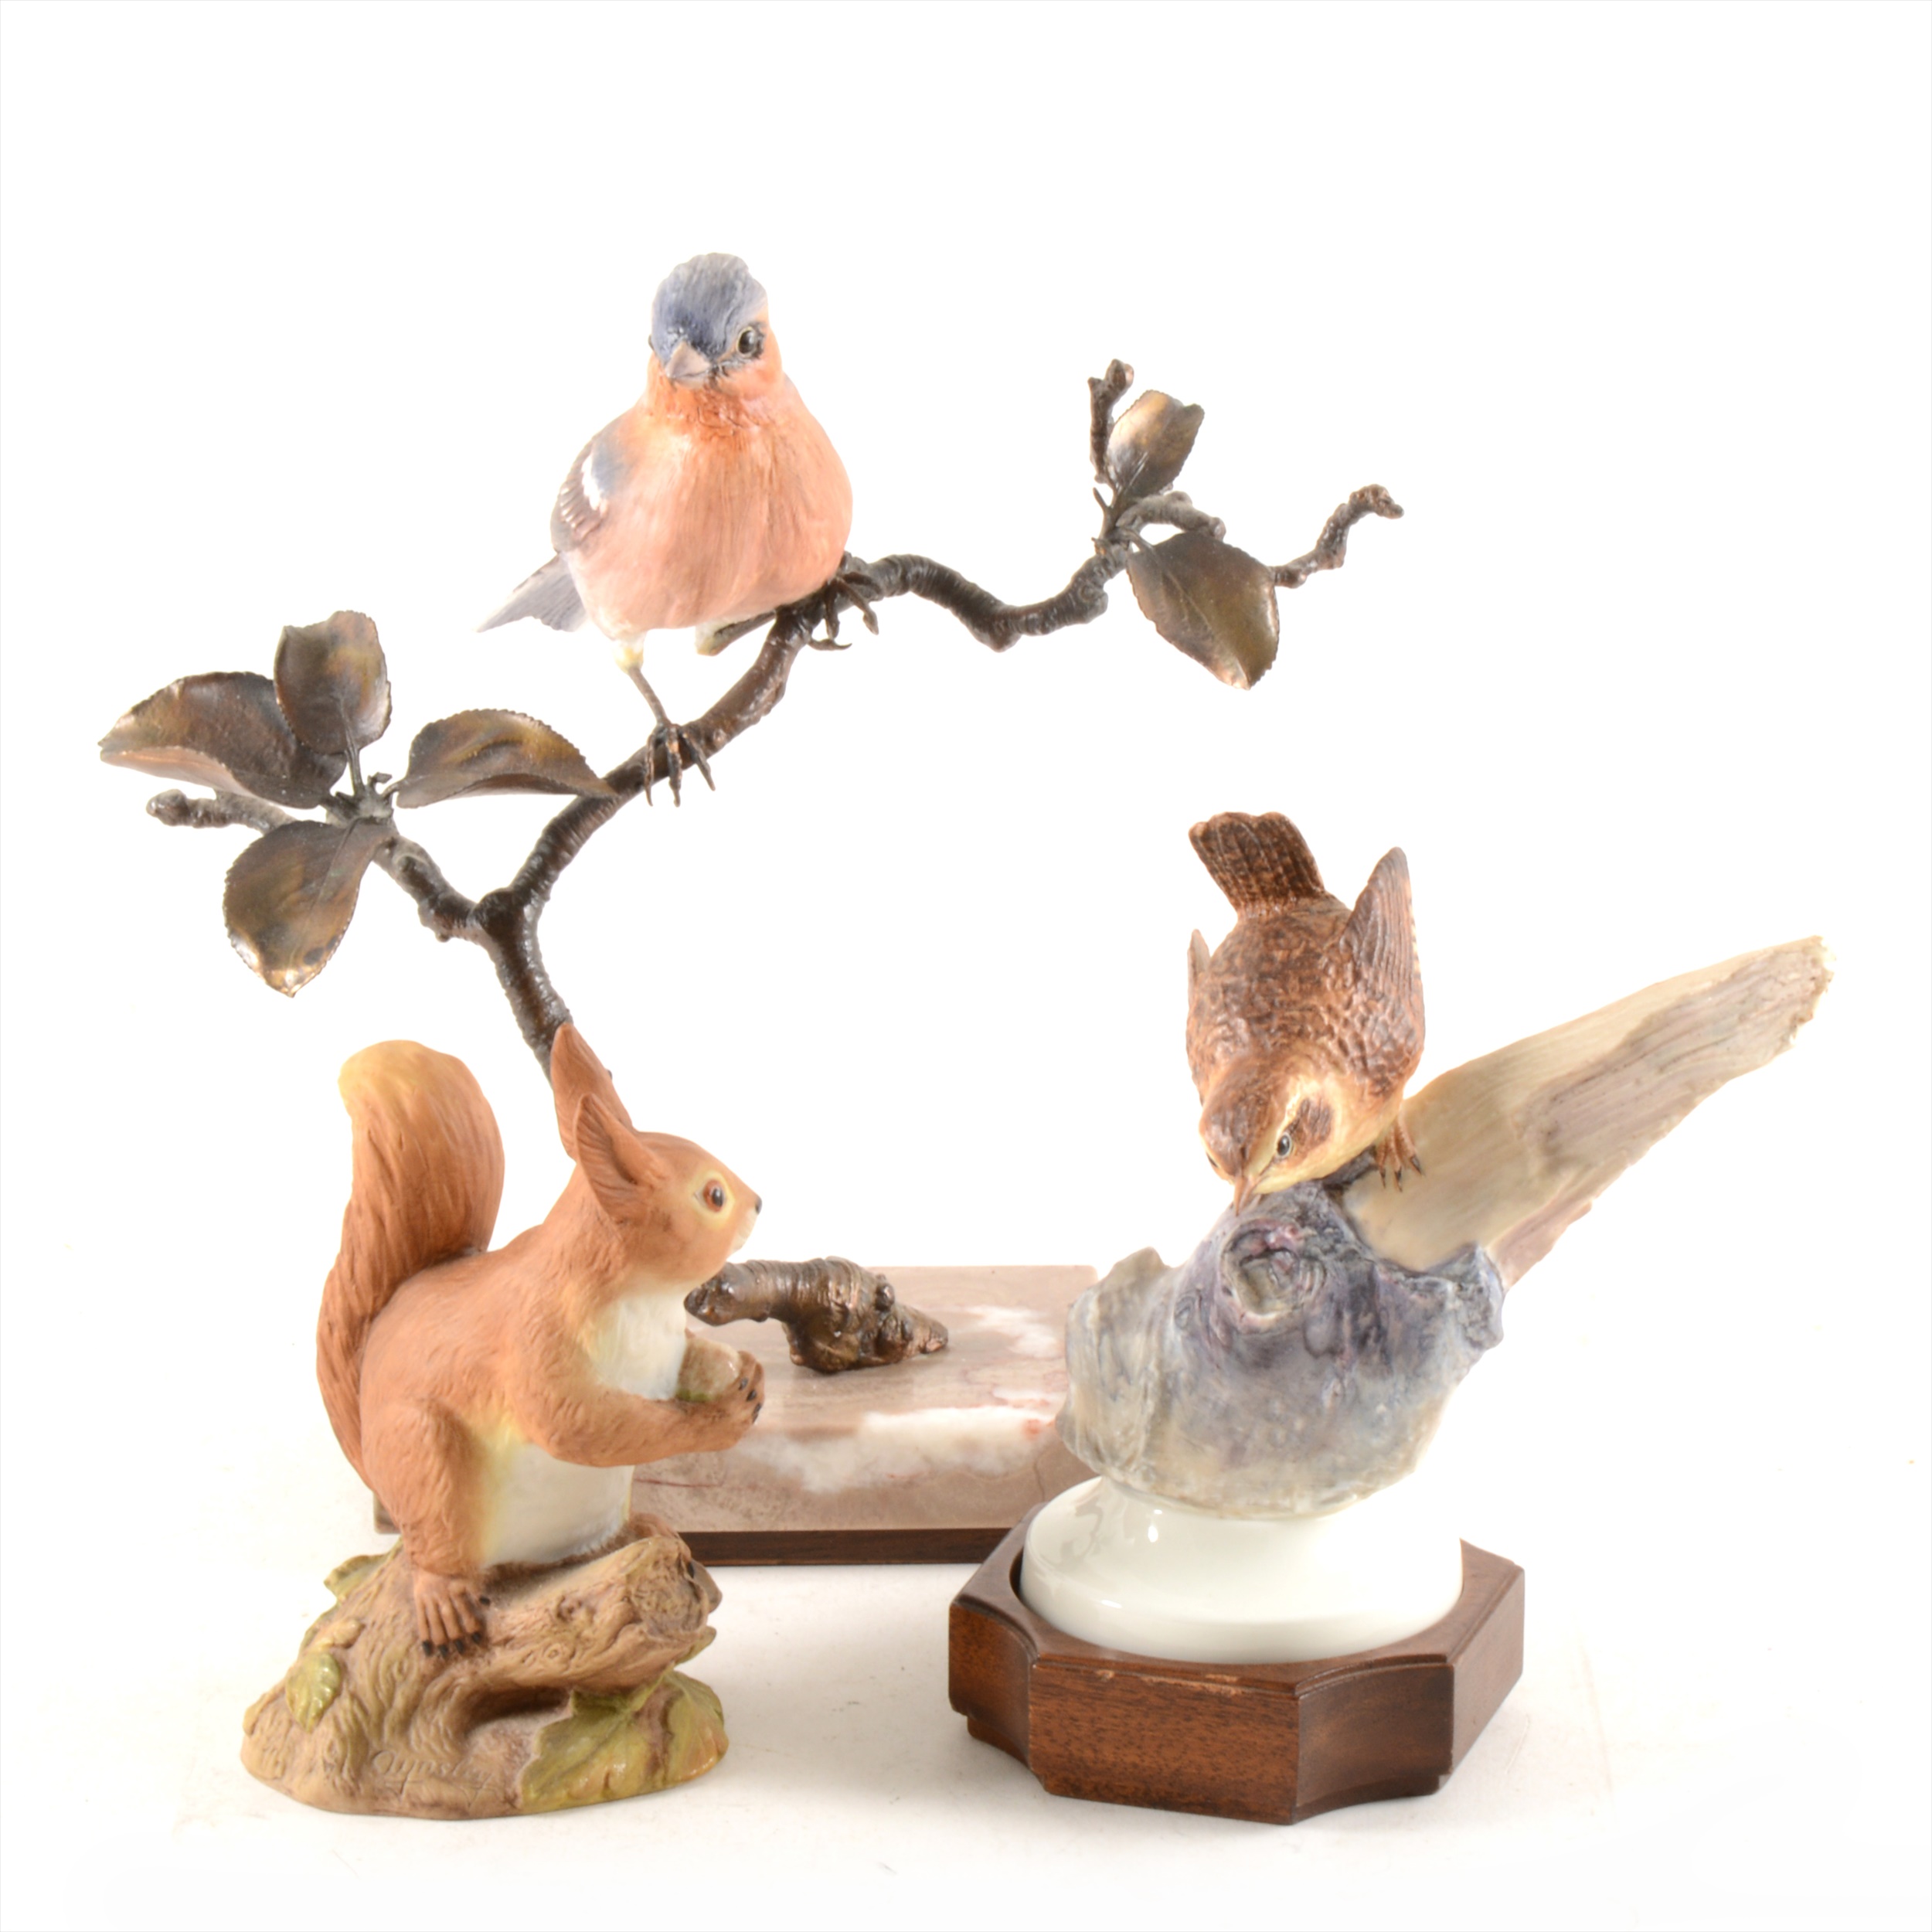 Red squirrel - Aynsley Porcelain 1975, wren - Albany Fine China, chaffinch - Albany Fine China with